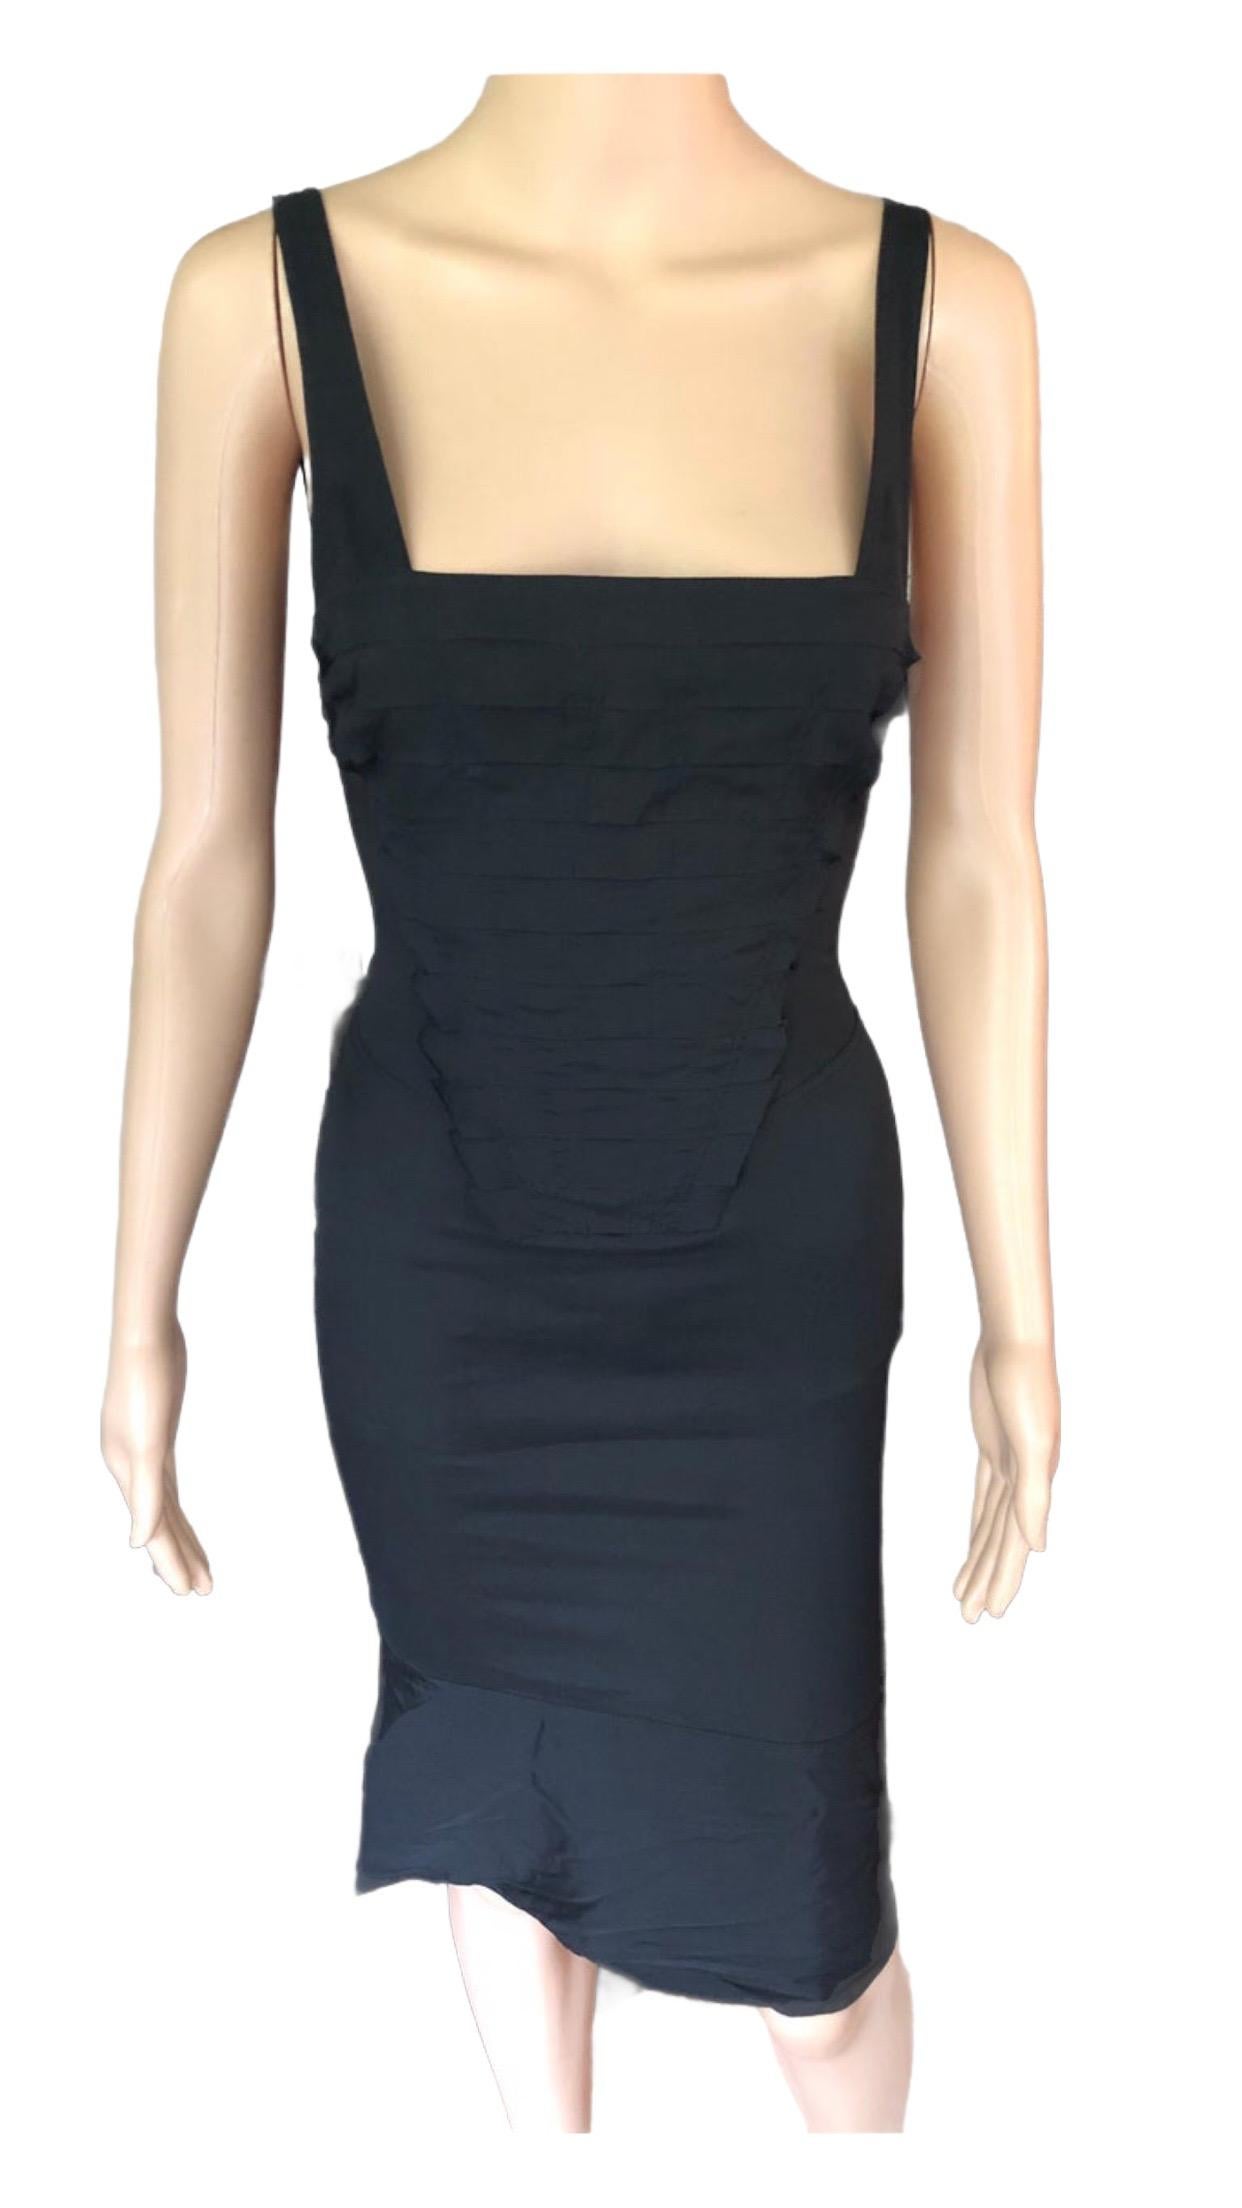 Gucci by Tom Ford S/S 2004 Cutout Black Dress For Sale 2